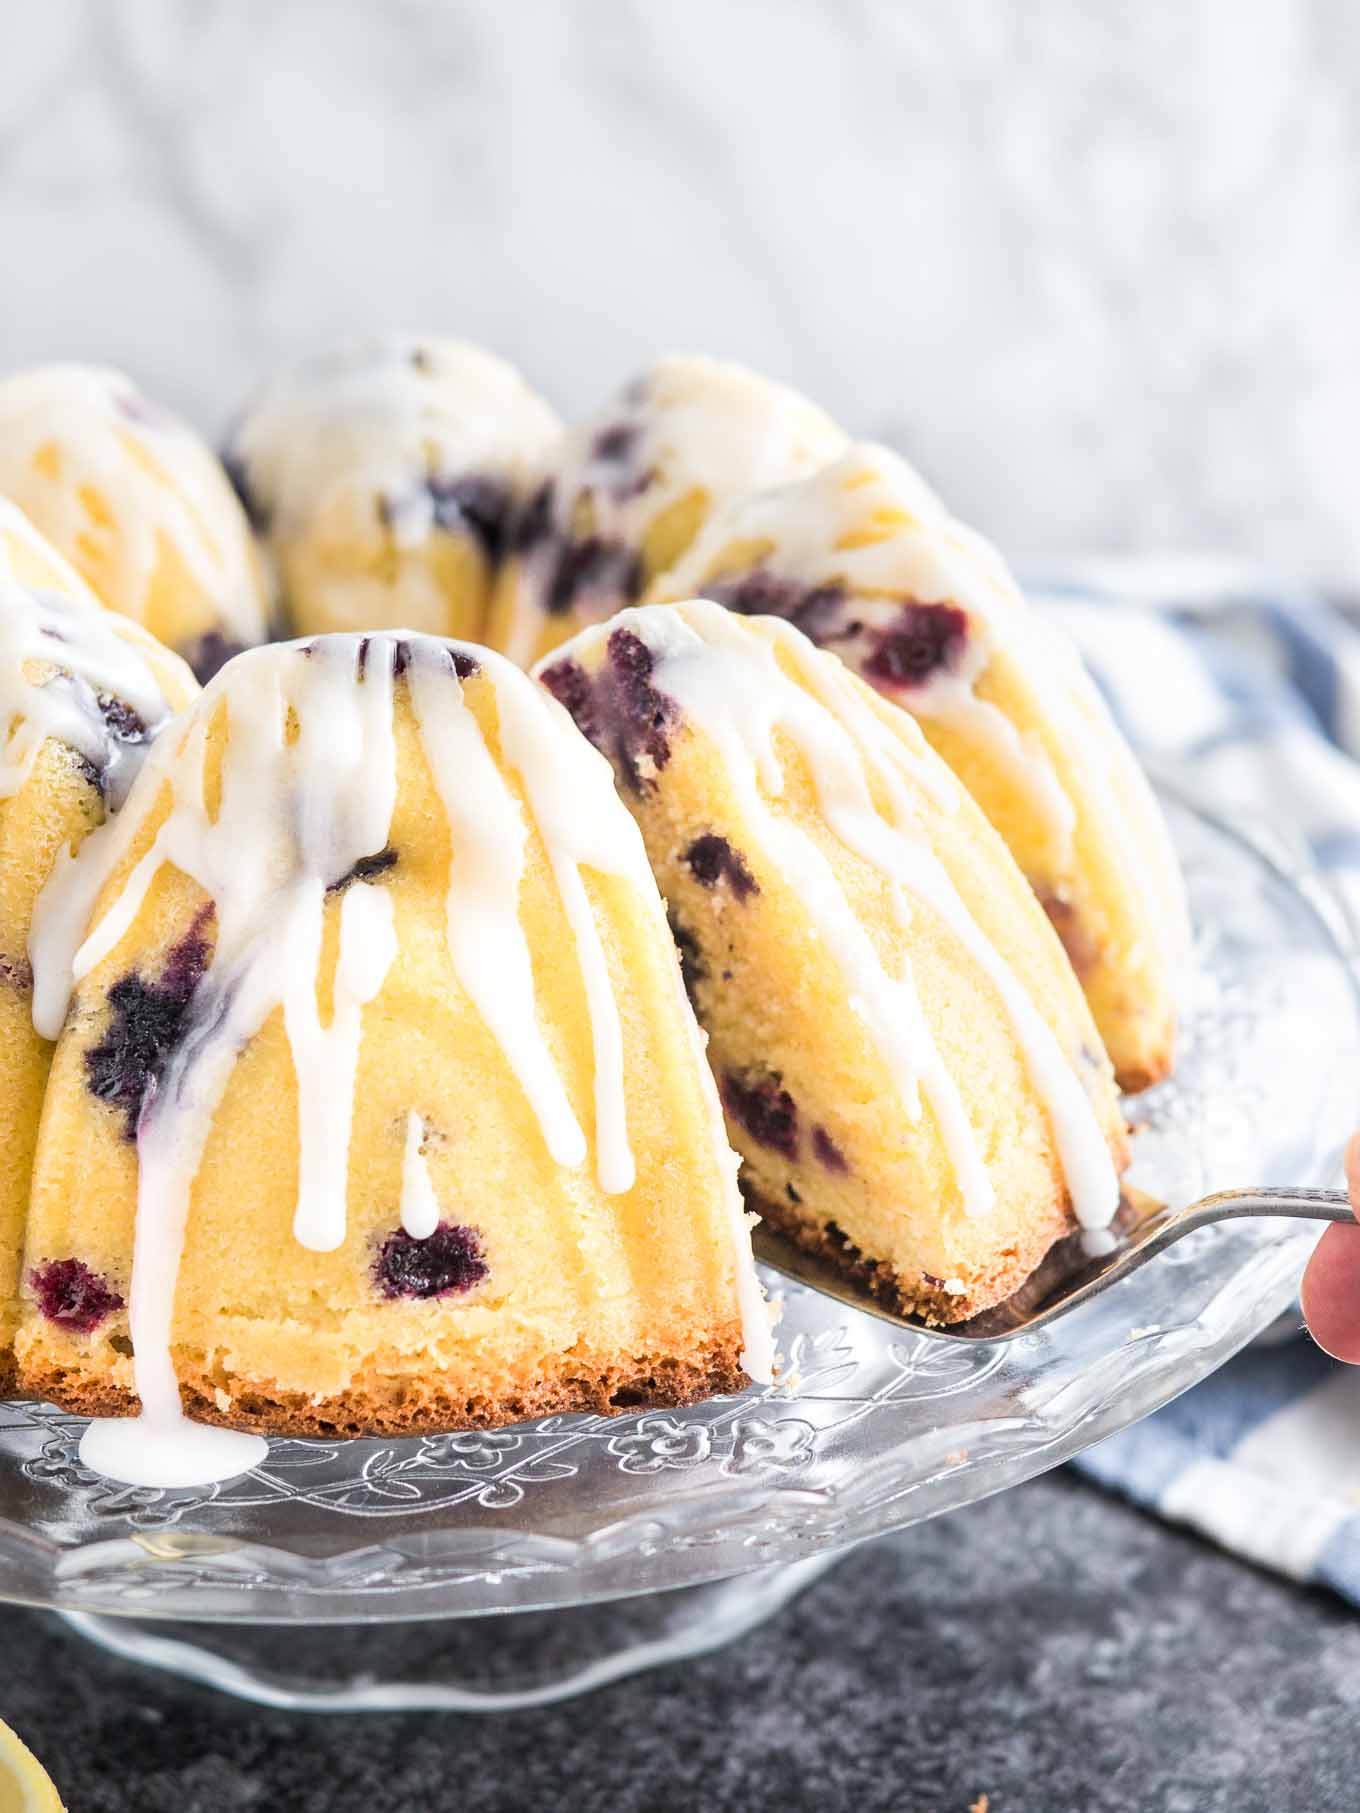 A lemon blueberry bundt cake on a glass serving platter with lemon glaze. A cake server is lifting out a slice. There\'s a white and blue dishtowel in the background.